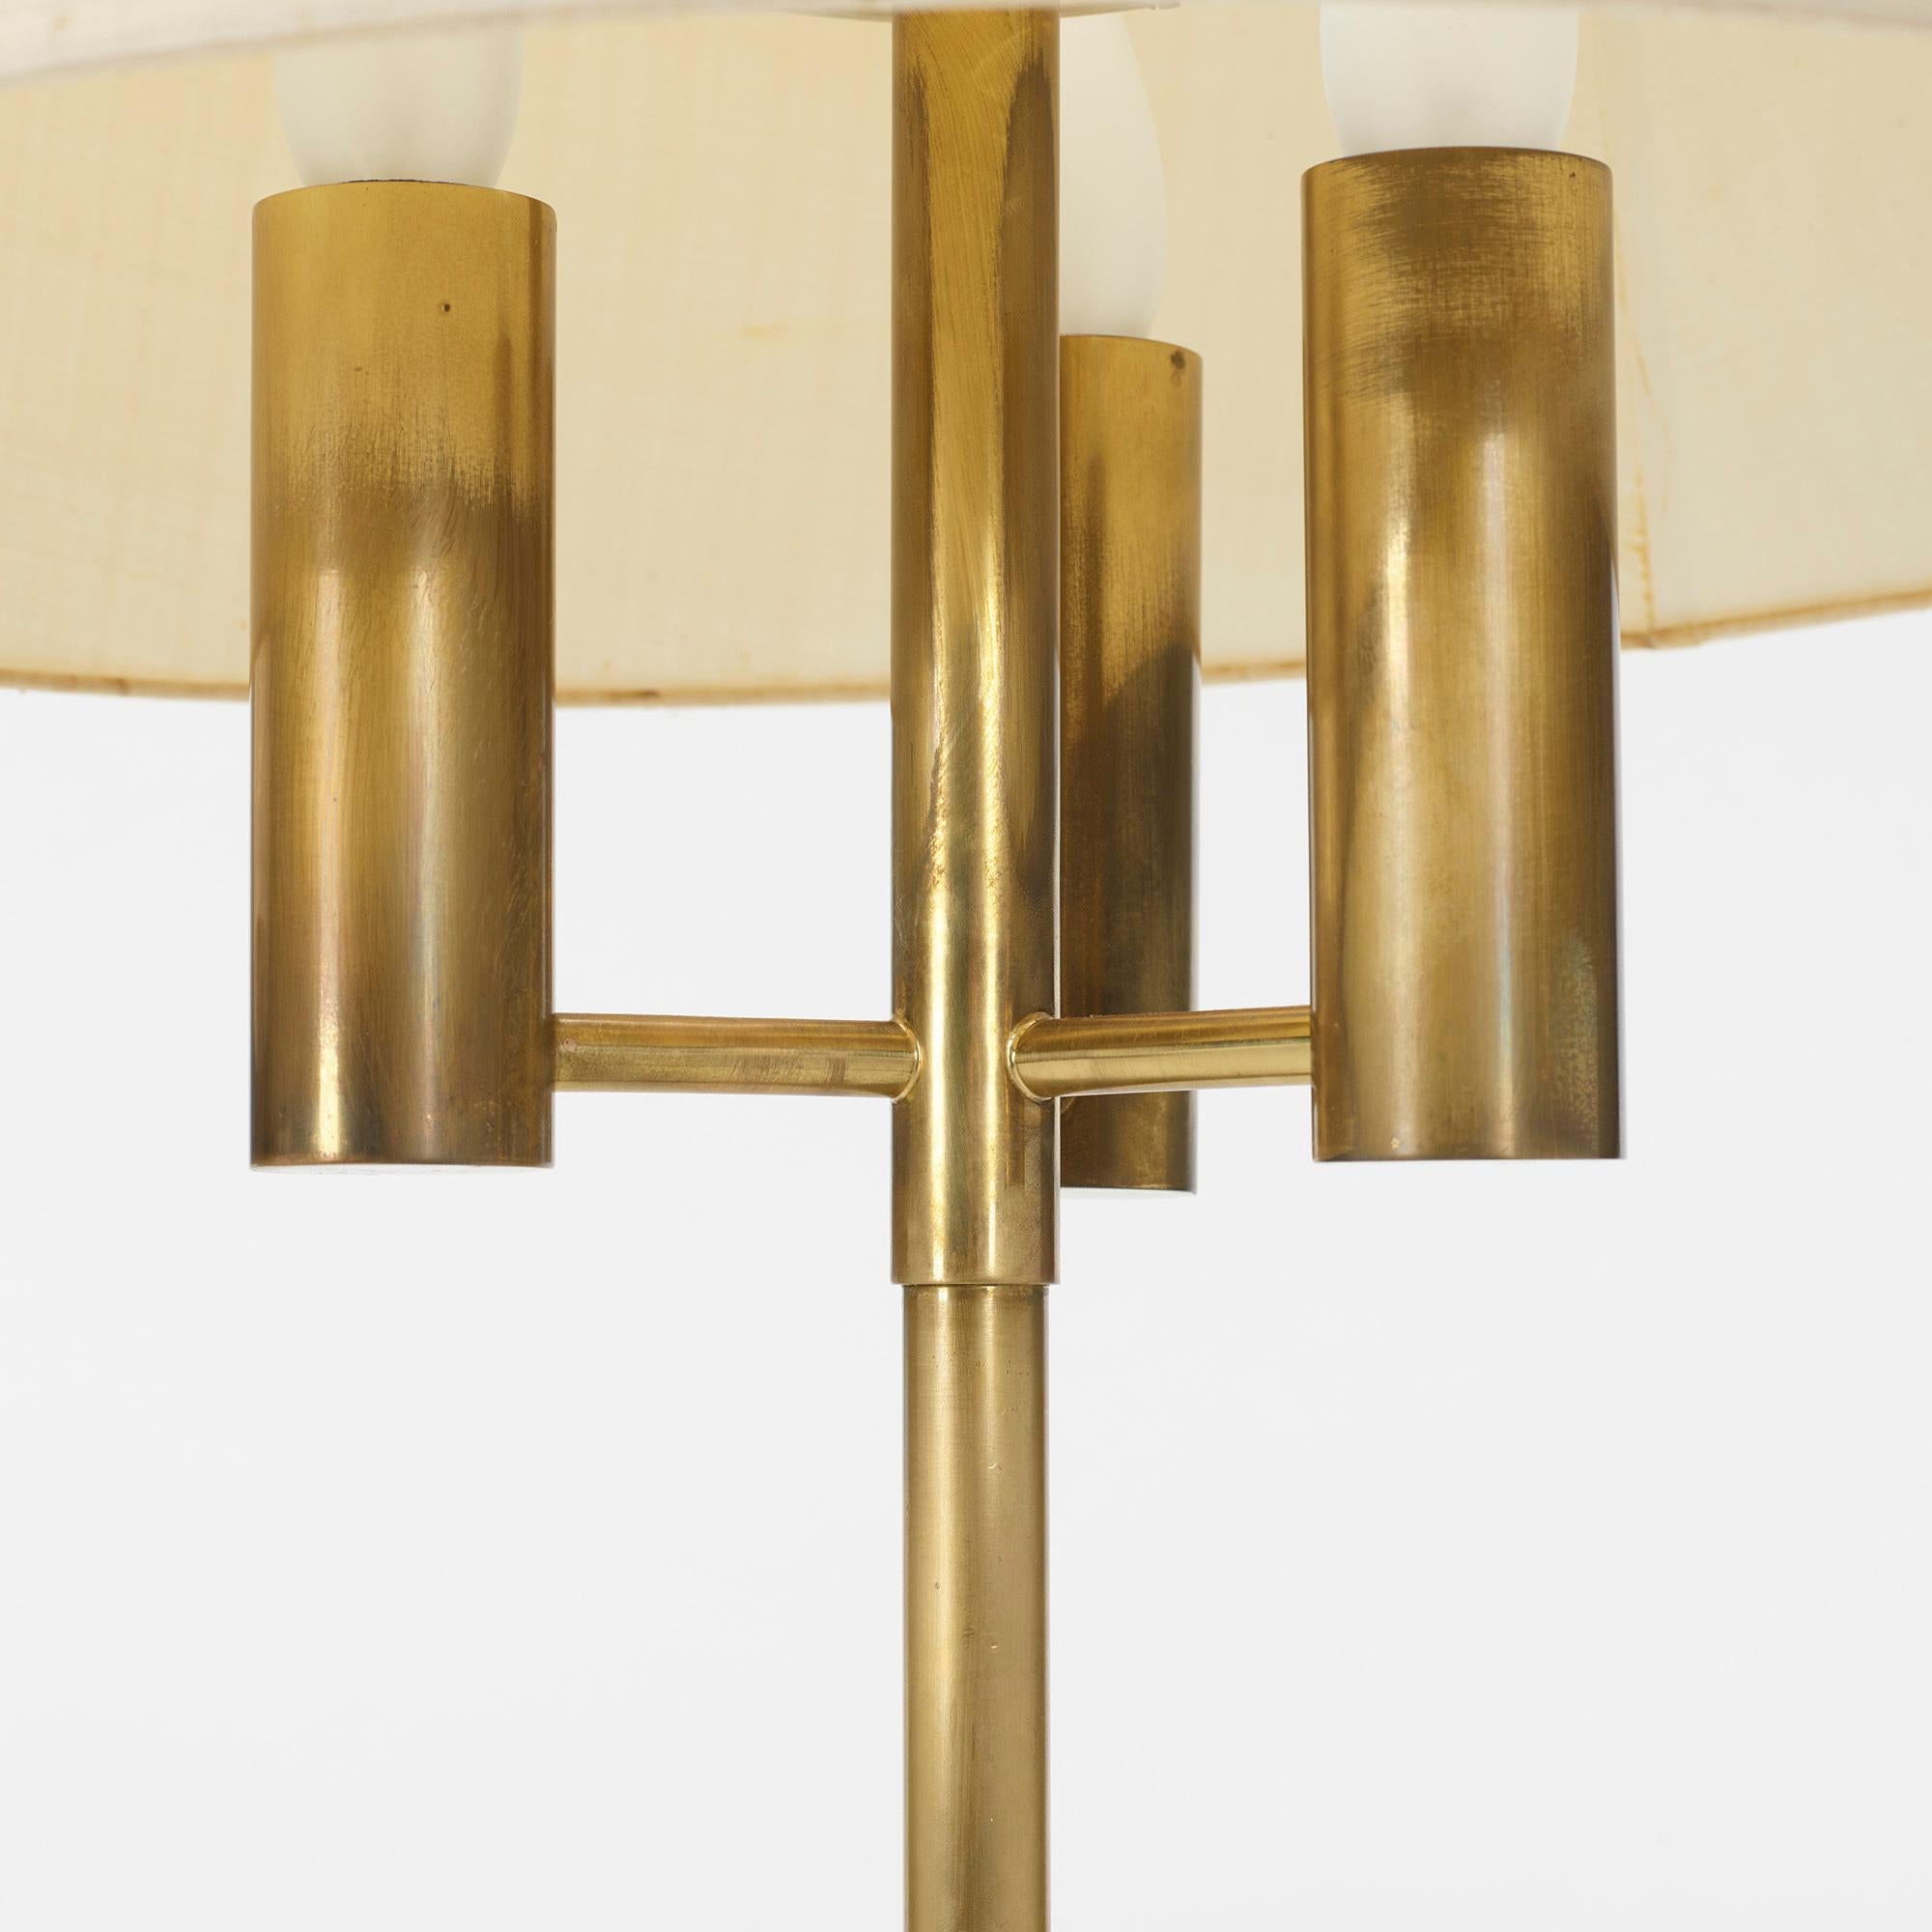 Danish Pair of Floor Lamps by Svend Aage Holm Sørensen, circa 1950 For Sale